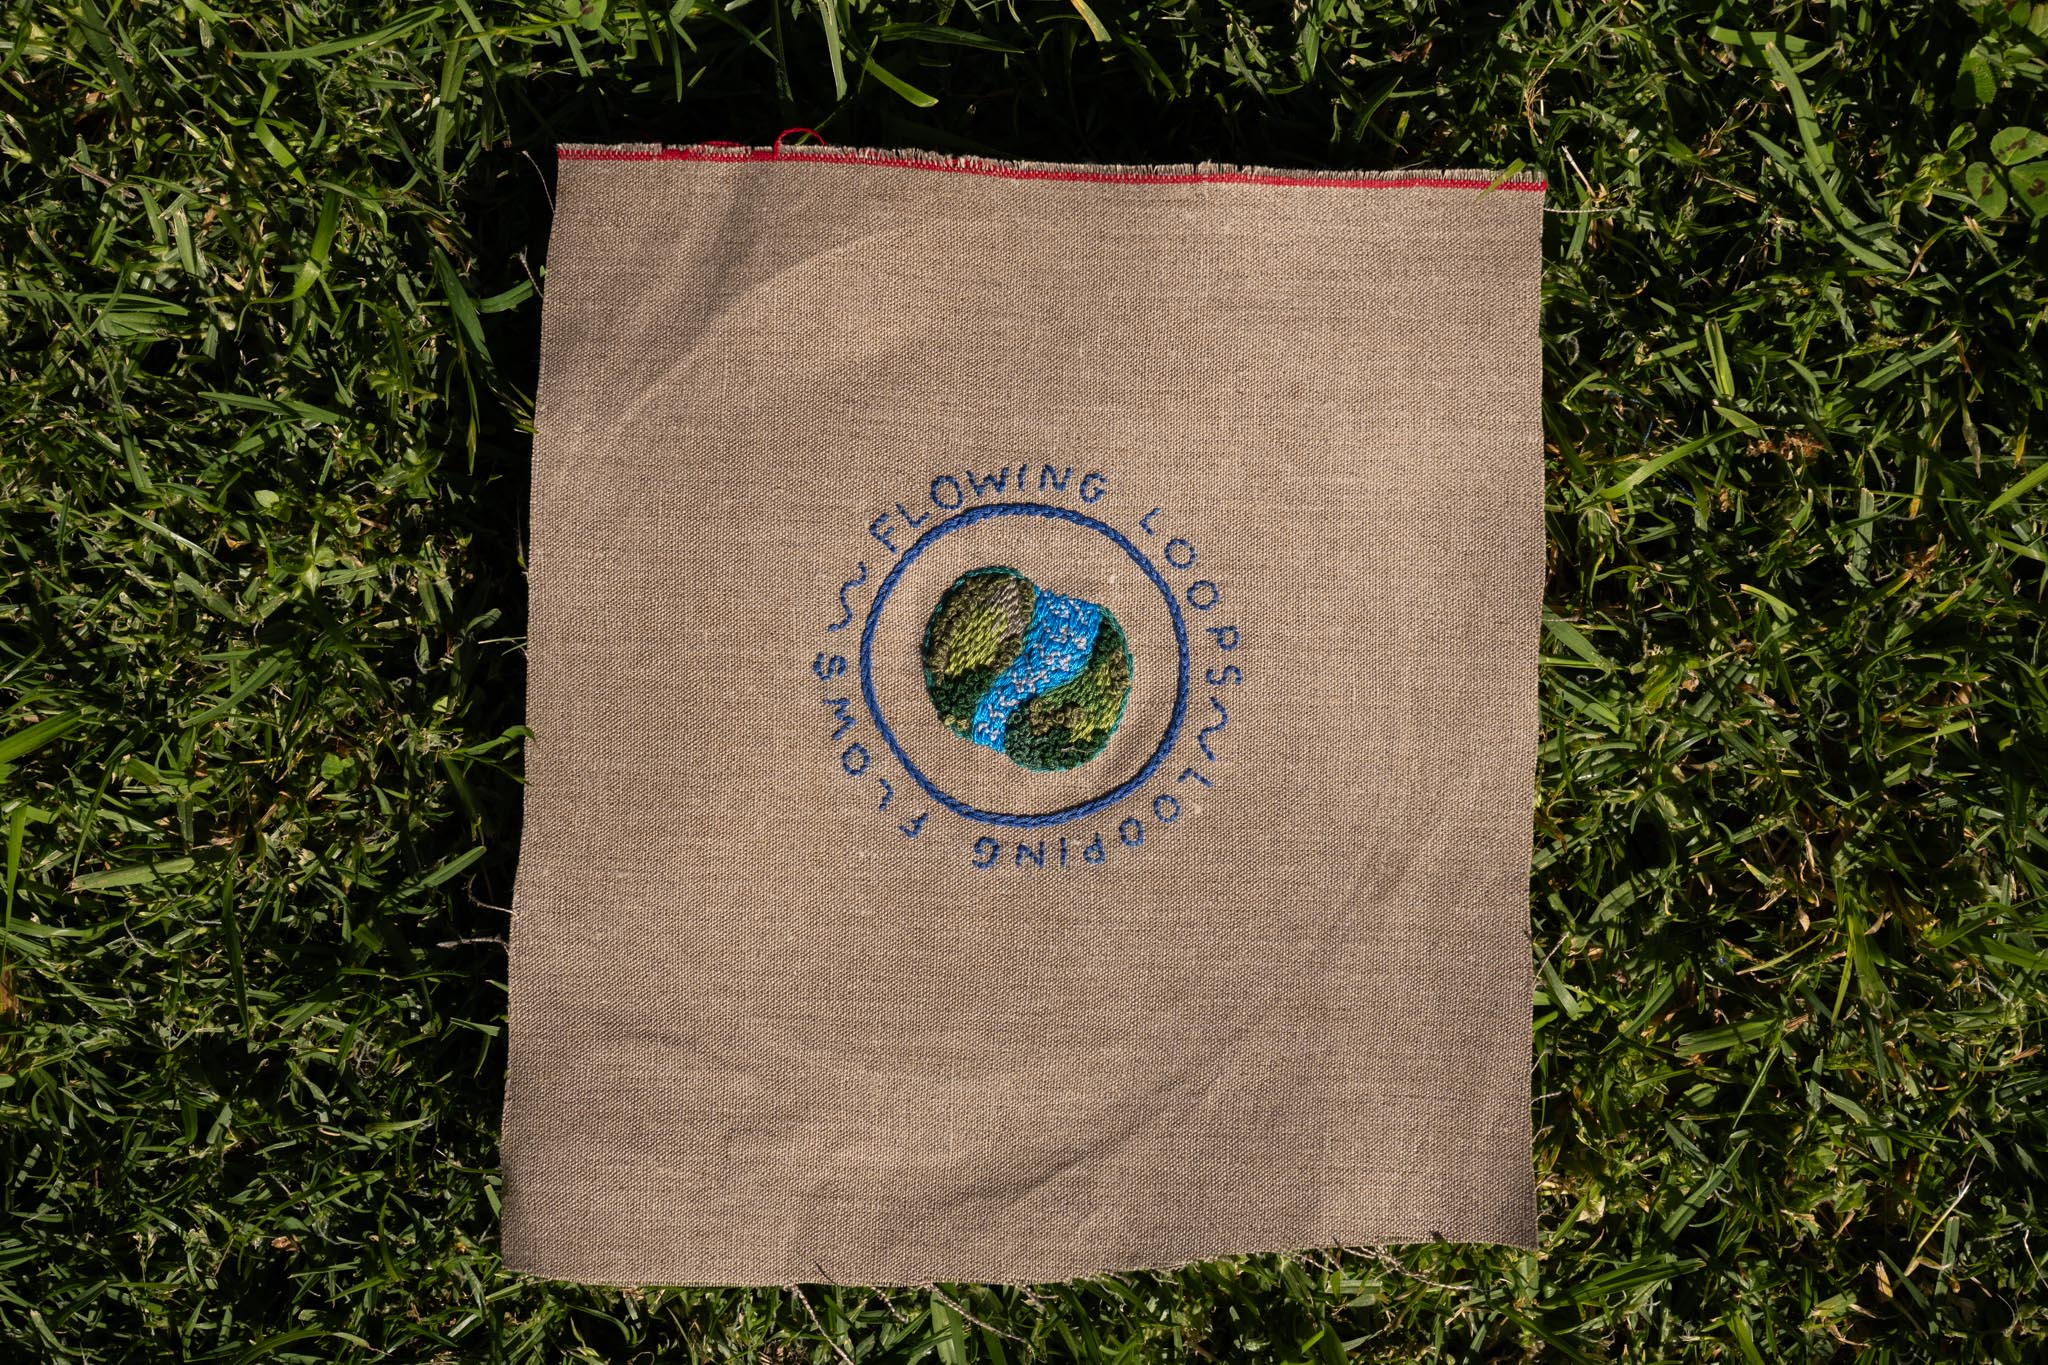 The Flowing Loops Logo is a photo of hand embroidered words "Flowing Loops Looping Flows" and blue depictions of a river flanked by greenery on rough brown canvas, with green grass as a background